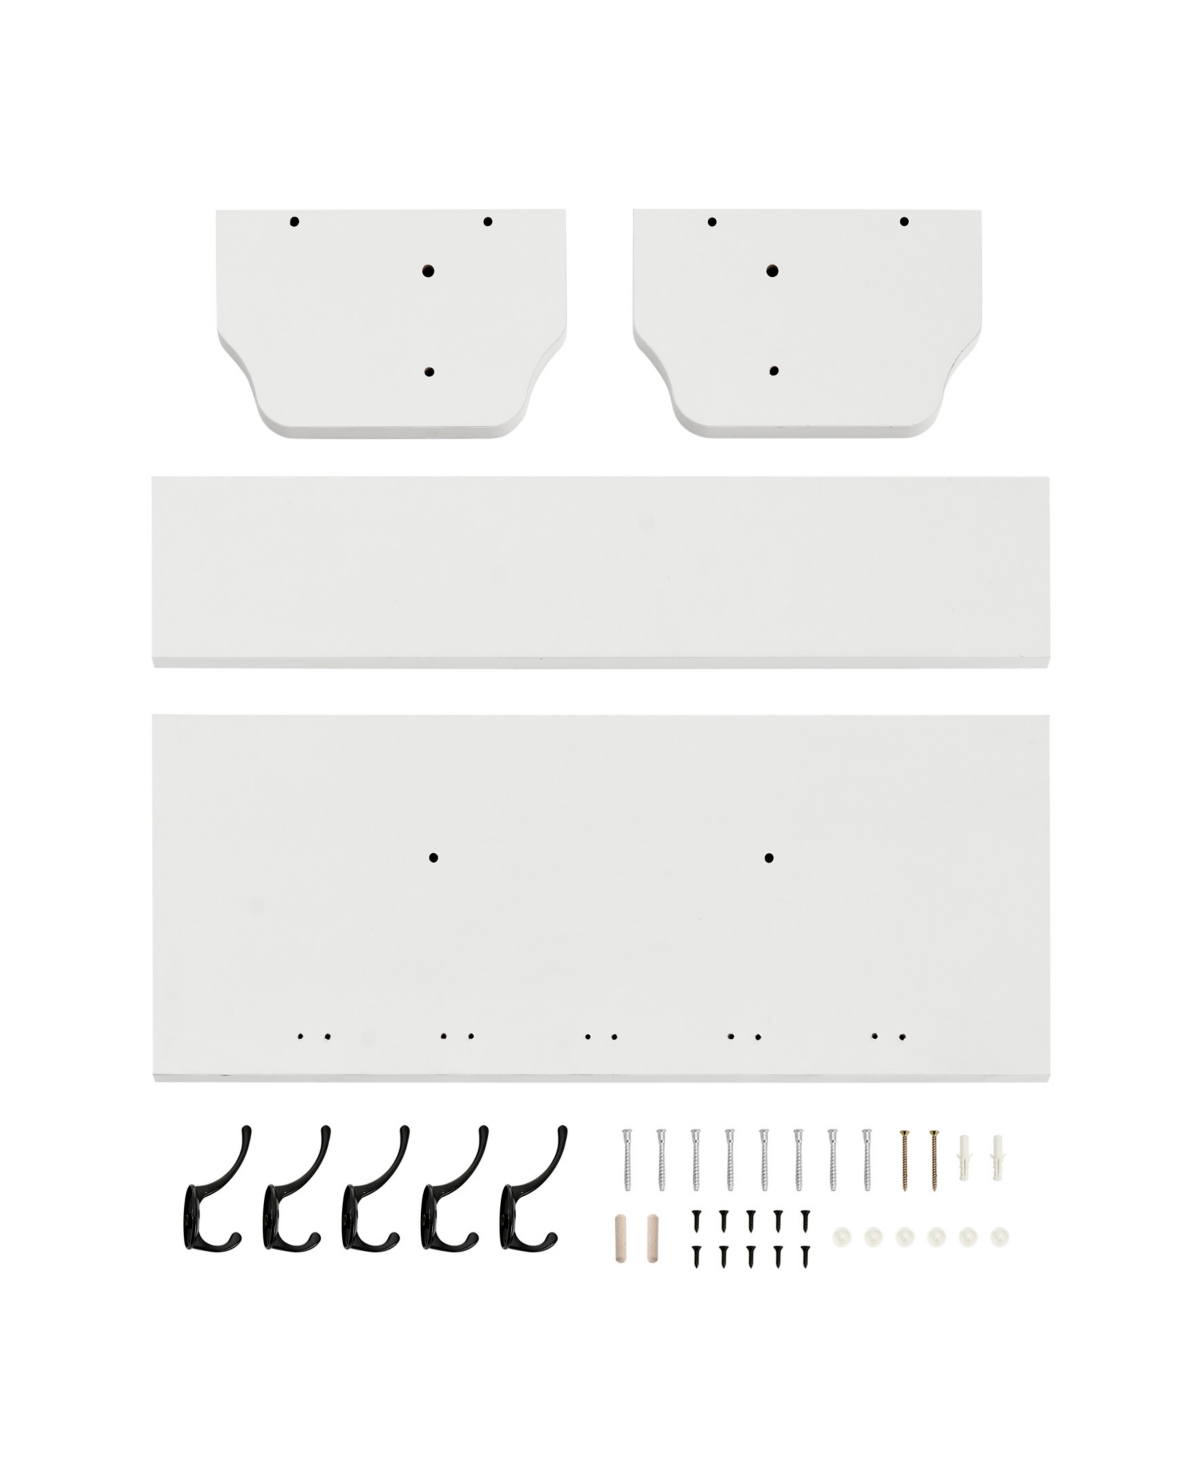 Shop Danya B Entryway Floating Utility Wall Shelf With Hooks, Wall Mounted In White